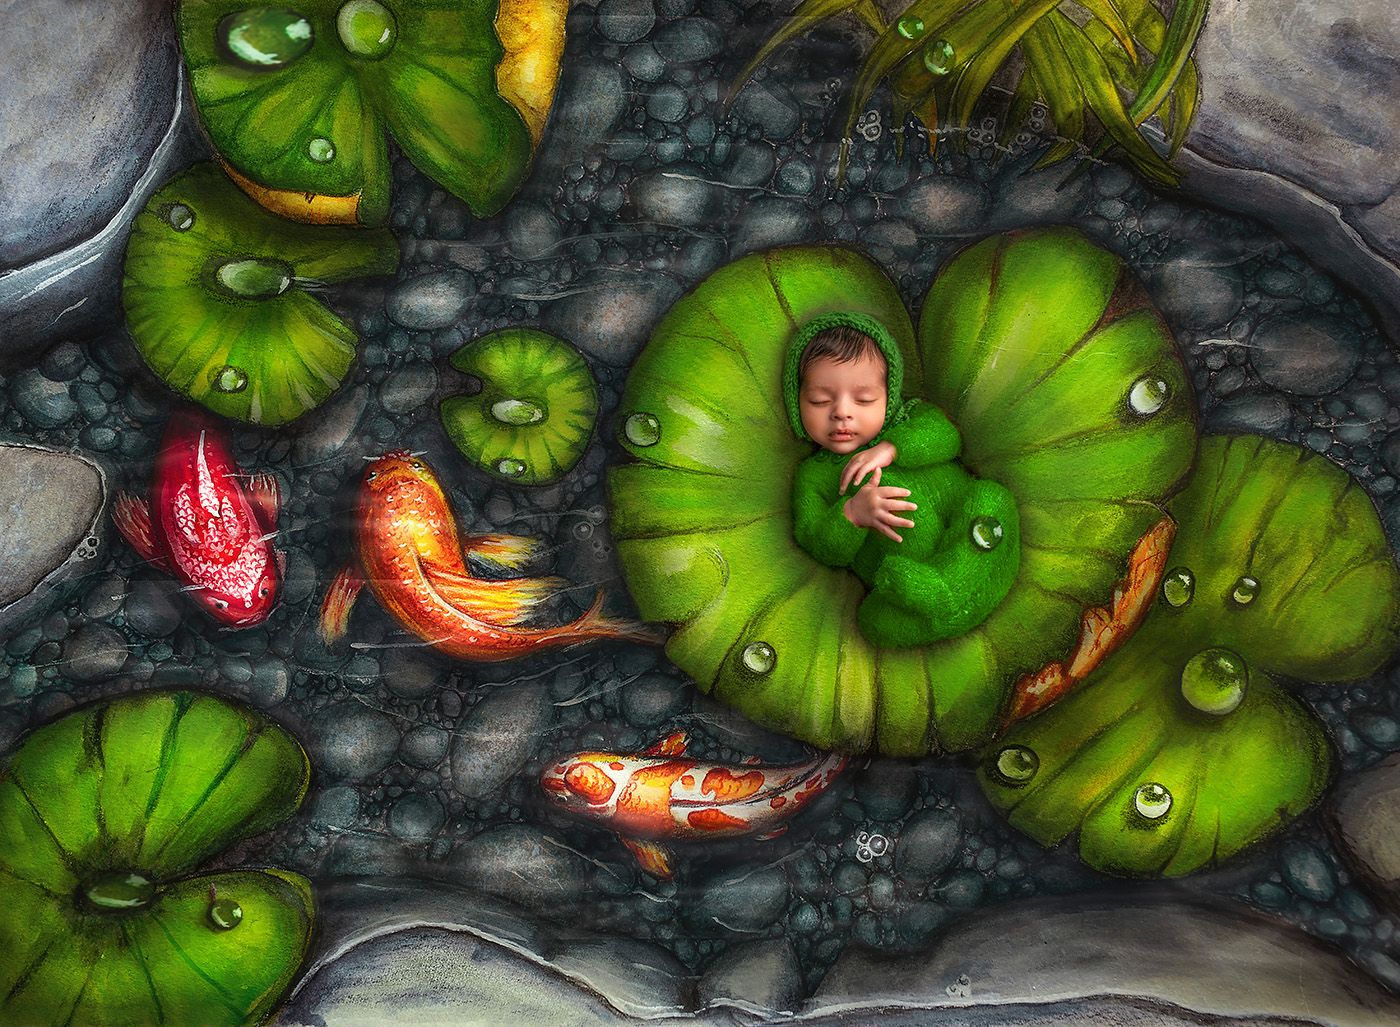 Newborn dressed as frog on Lilly pad surrounded by koi fish.